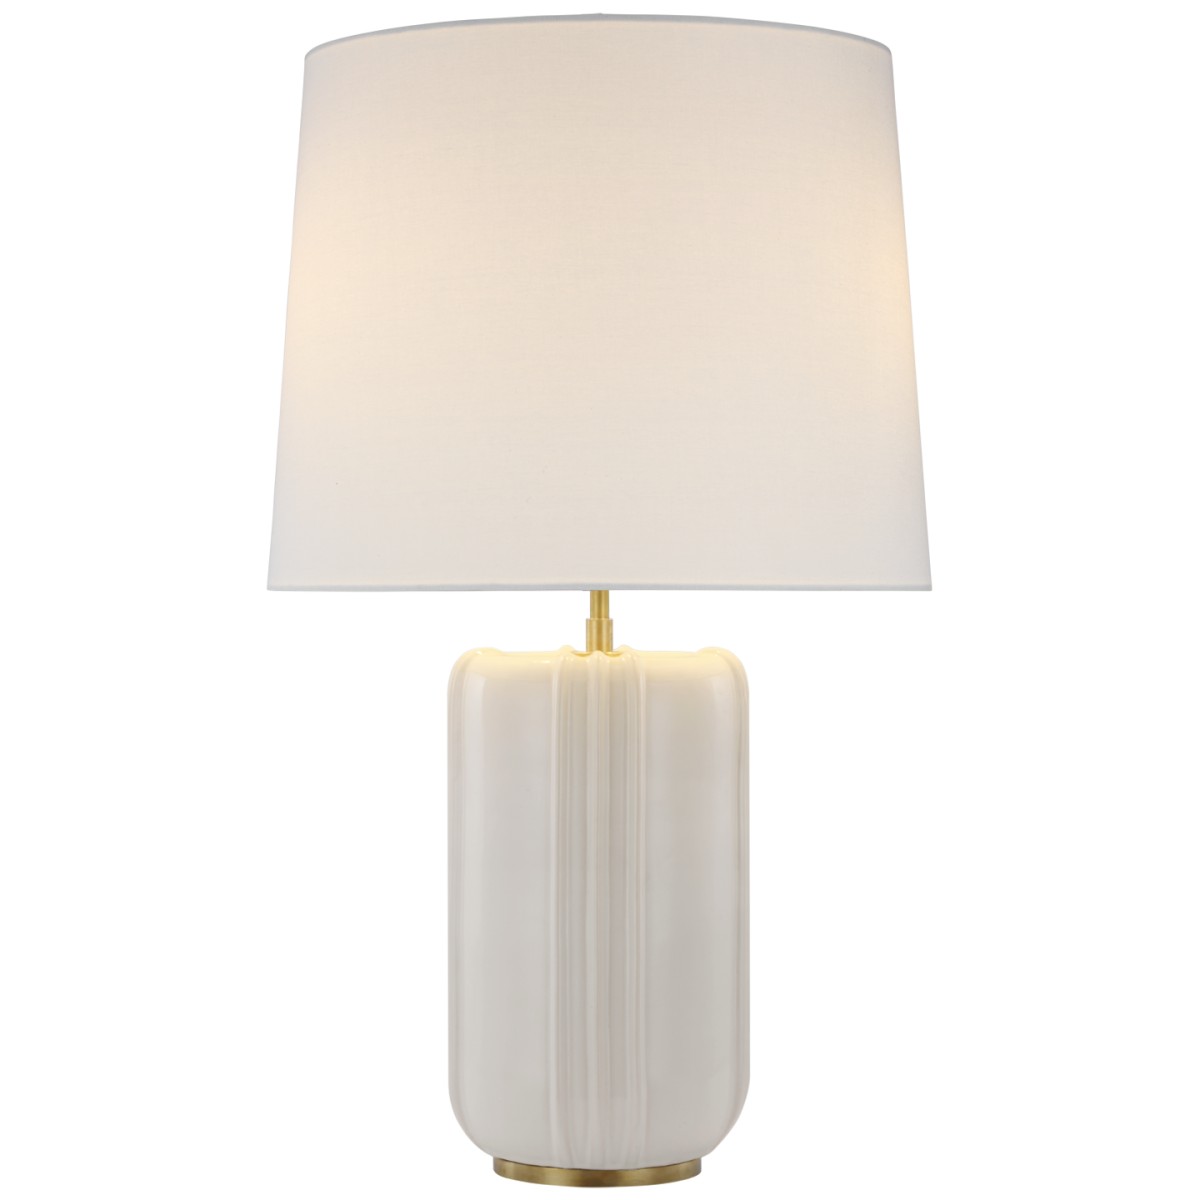 Minx Large Table Lamp with Linen Shade | Highlight image